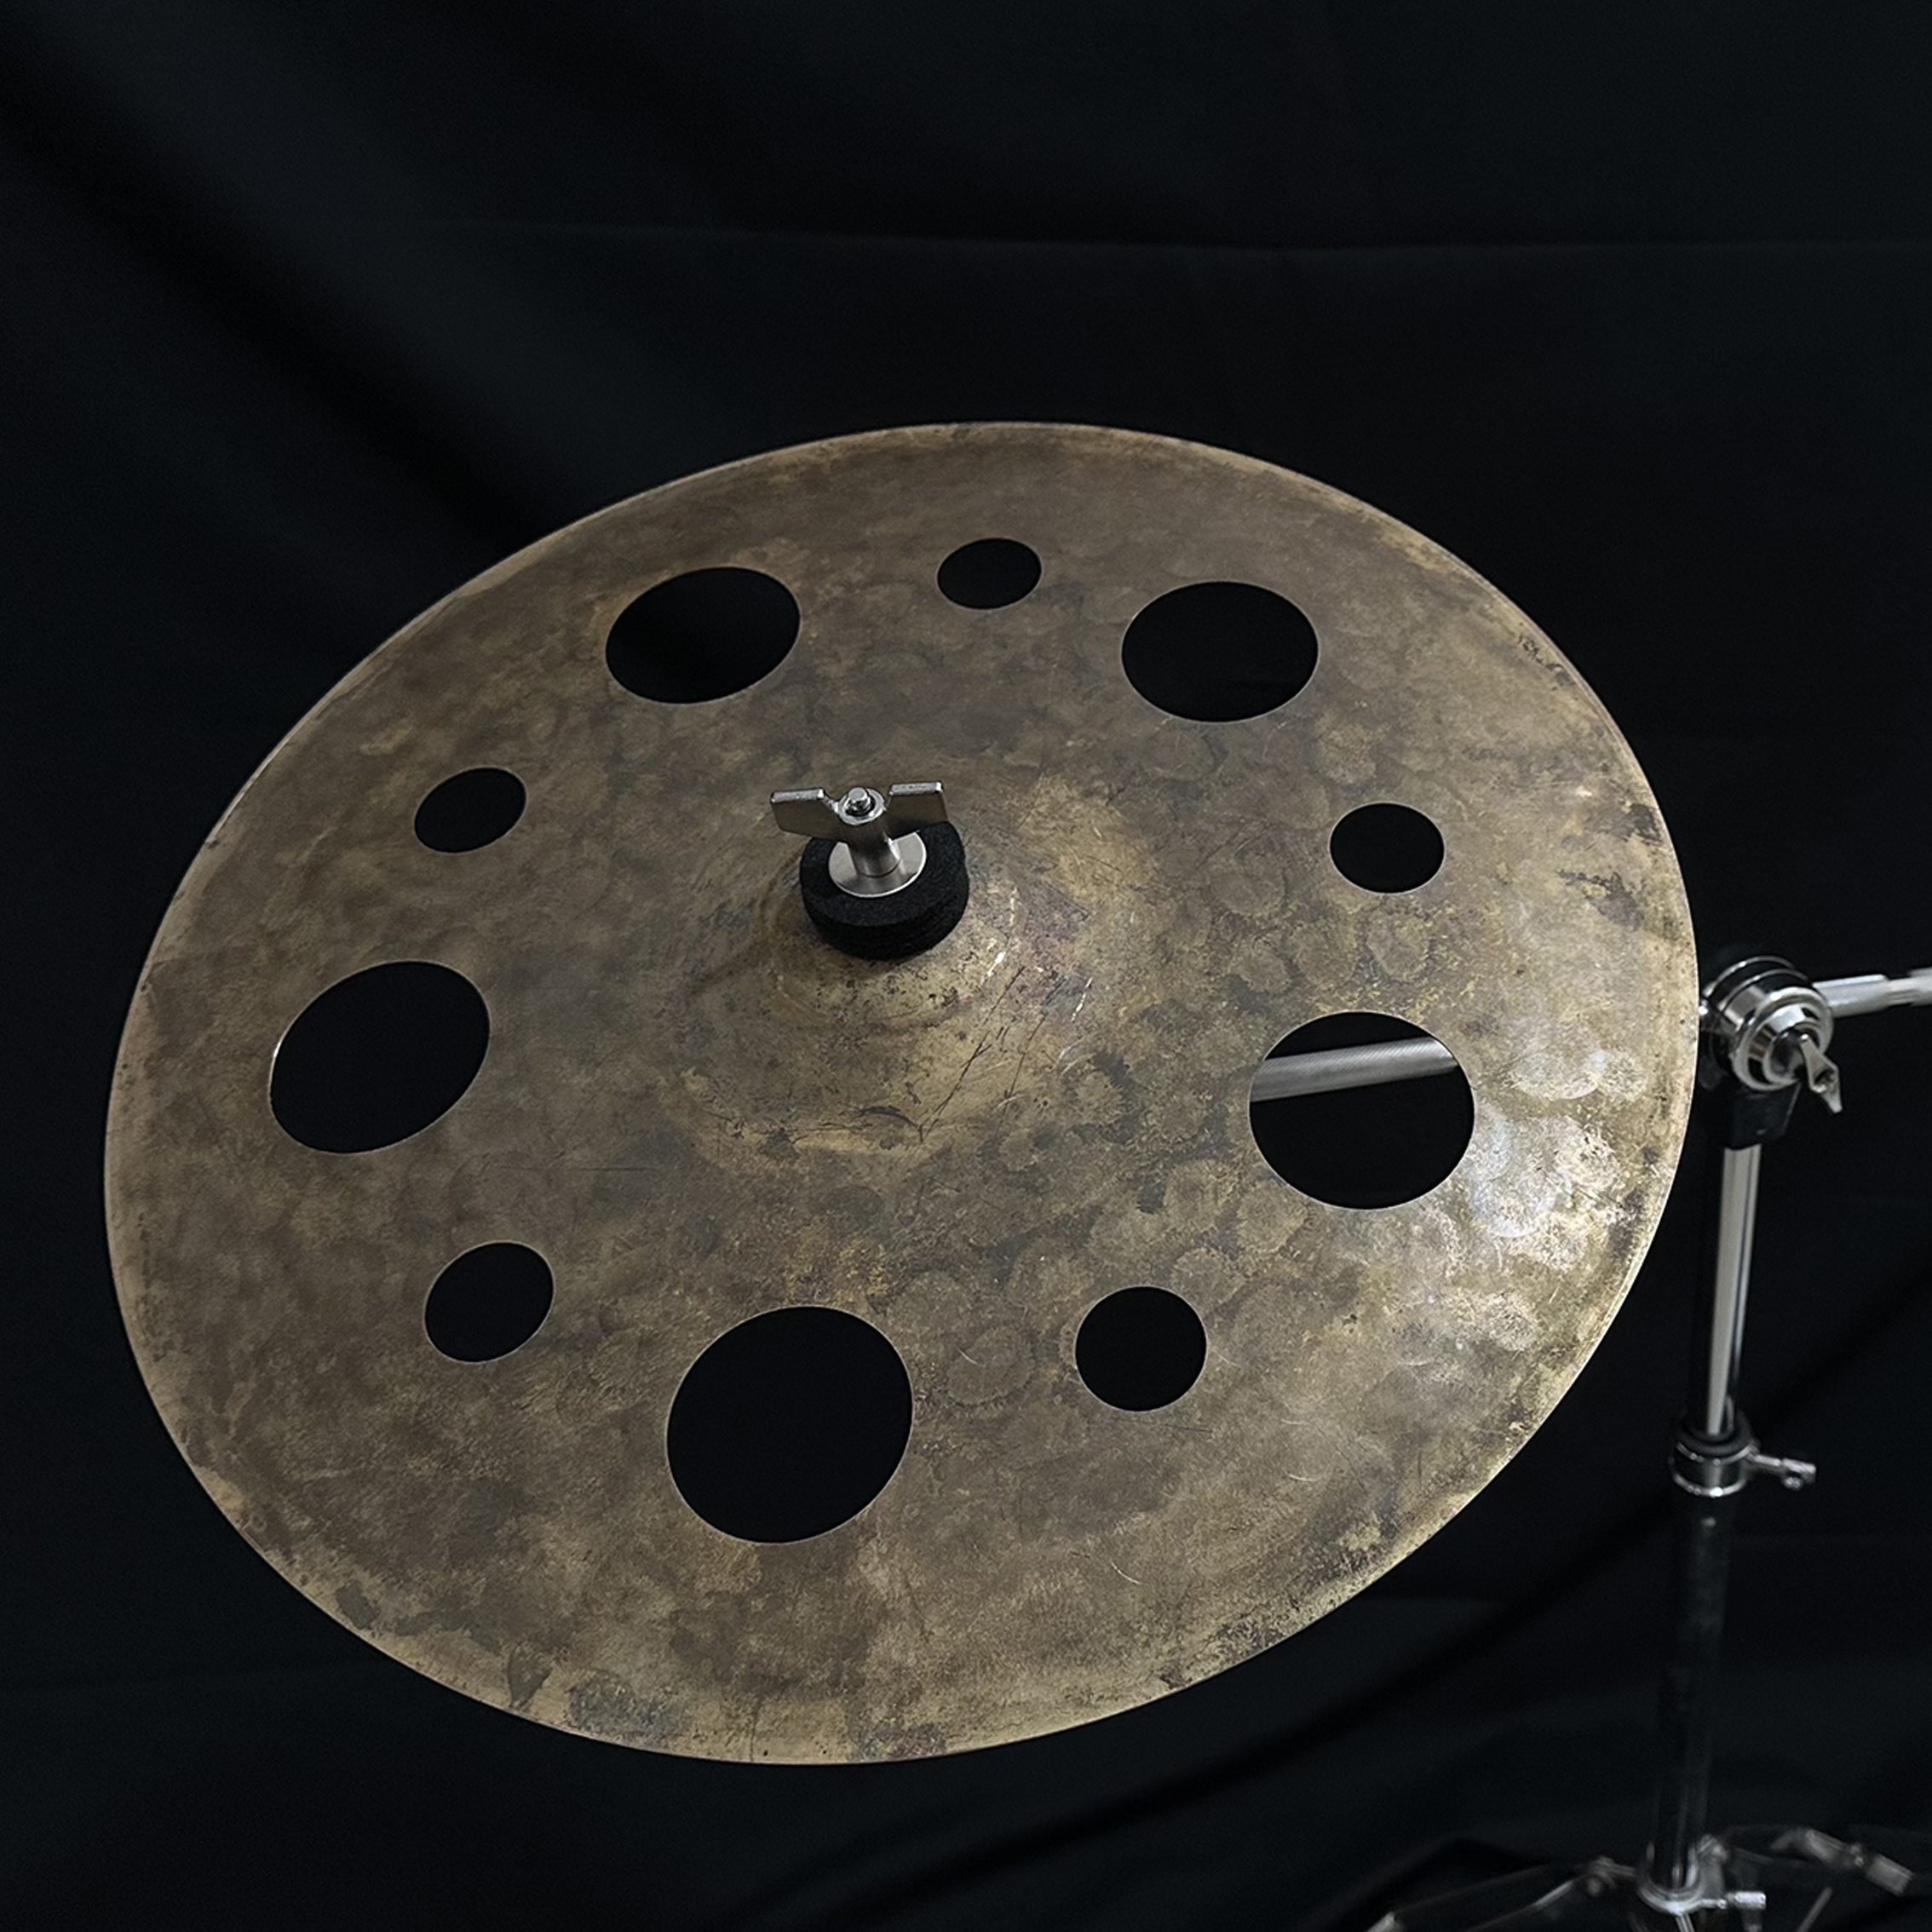 Aisen B20 Vintage Series cymbal set - Vybe Drums